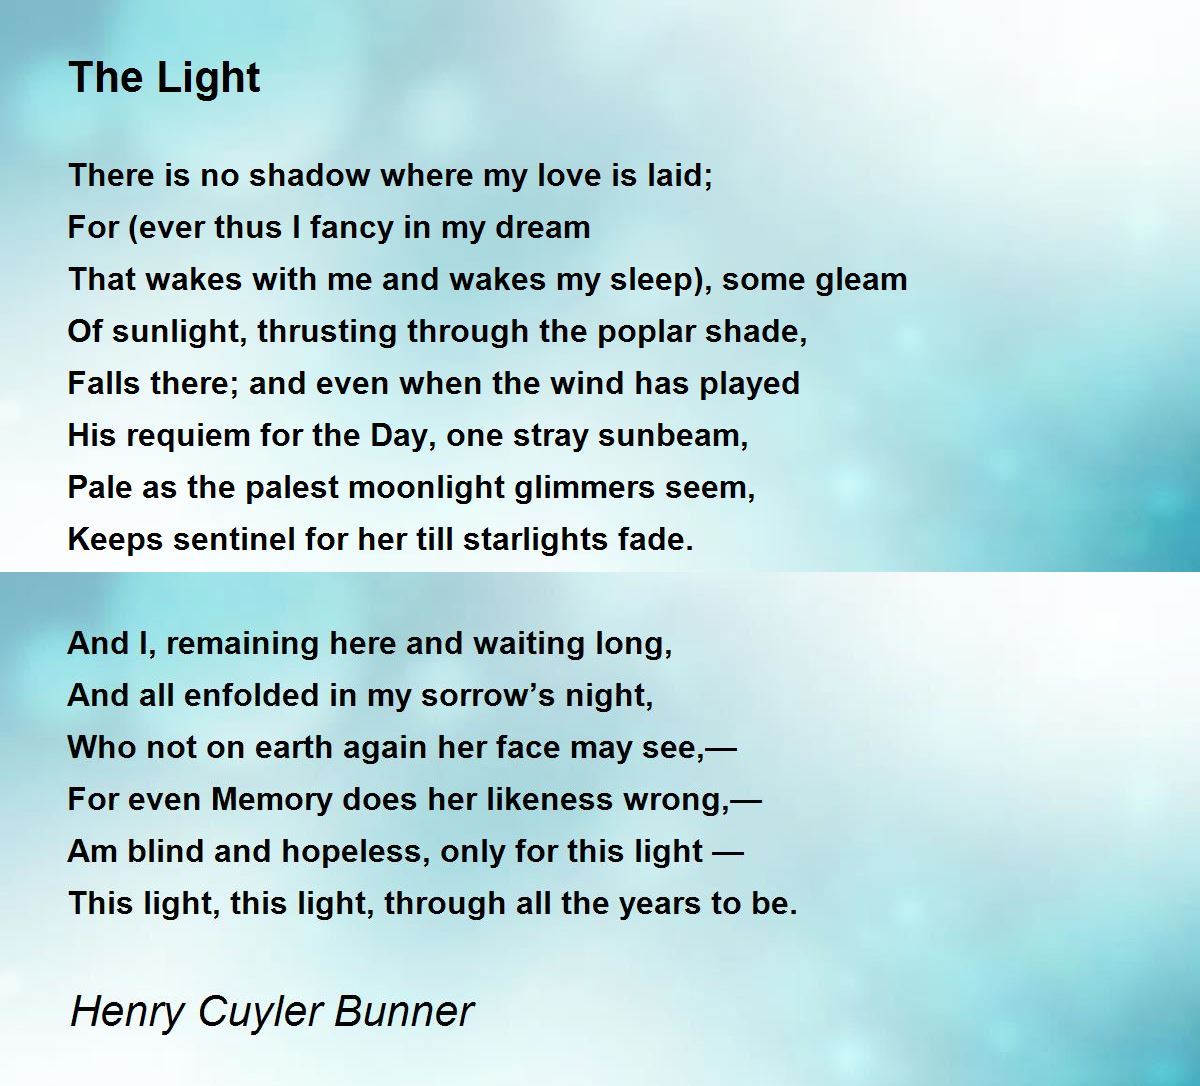 One, Two, Three! - One, Two, Three! Poem by Henry Cuyler Bunner